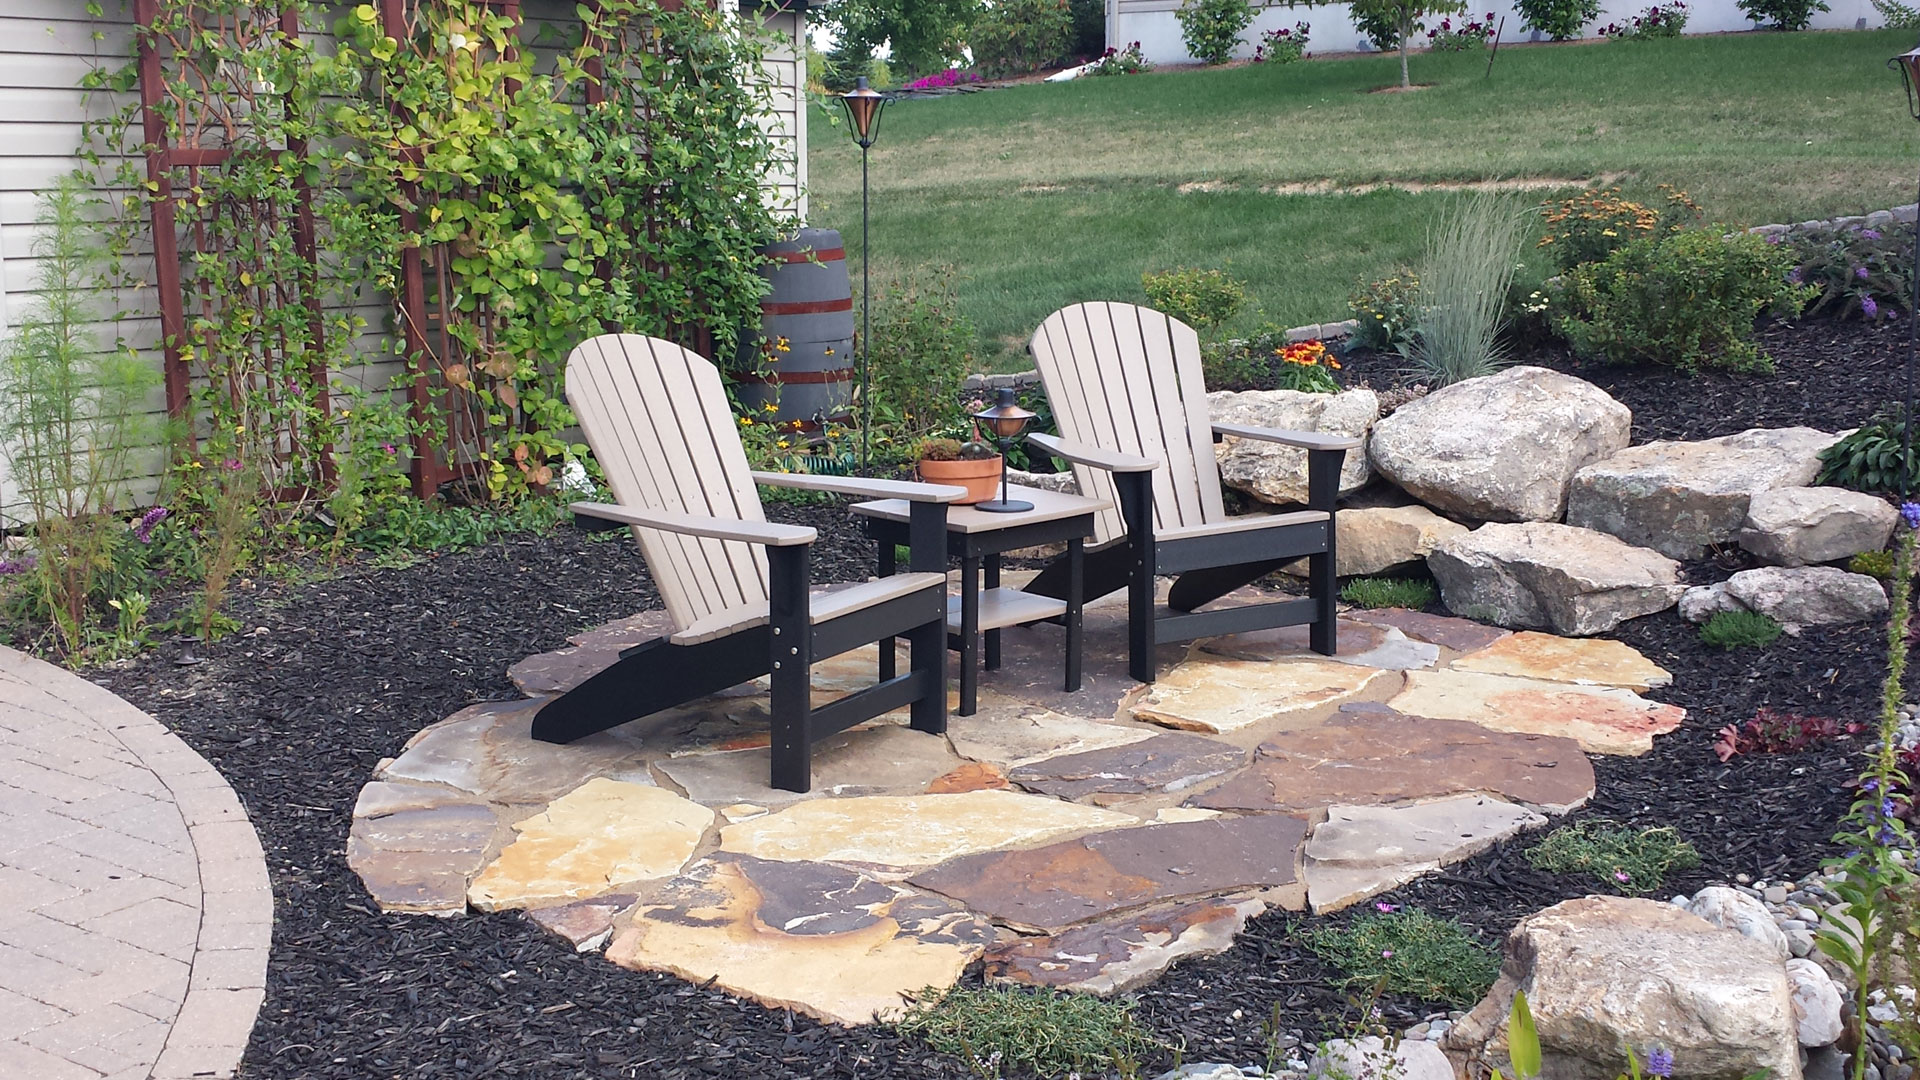 Natural flagstone seating area with chairs